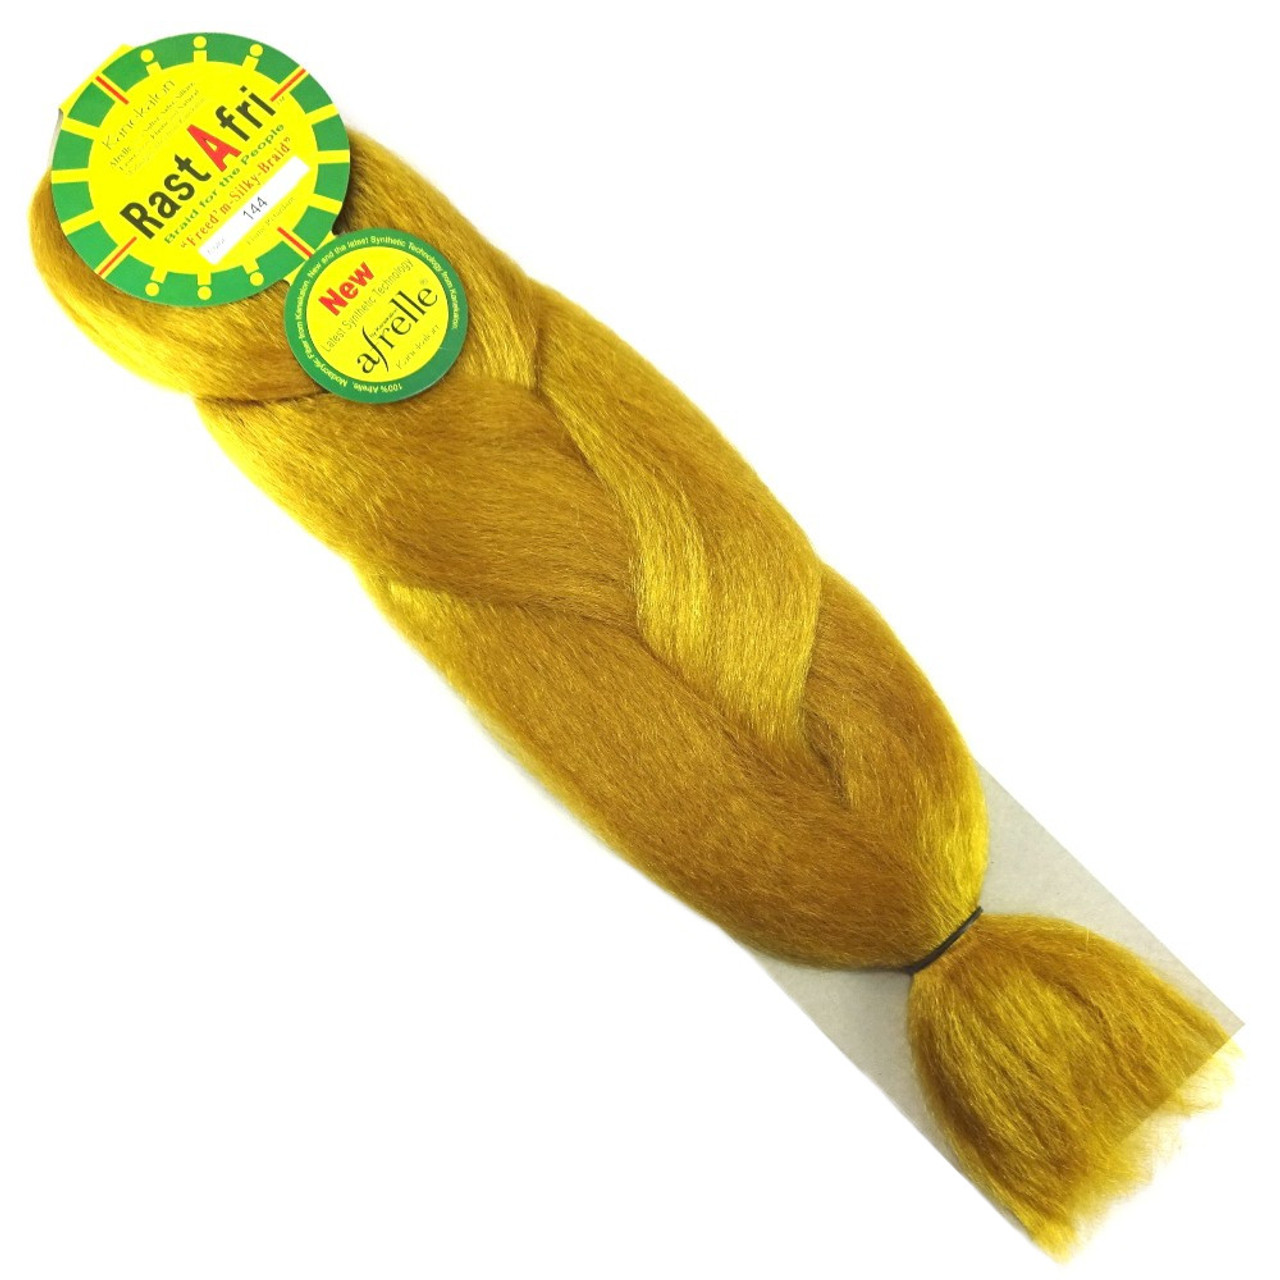 5 Meters Of Hot Golden English Snow Yarn With Floral Silk Ribbon